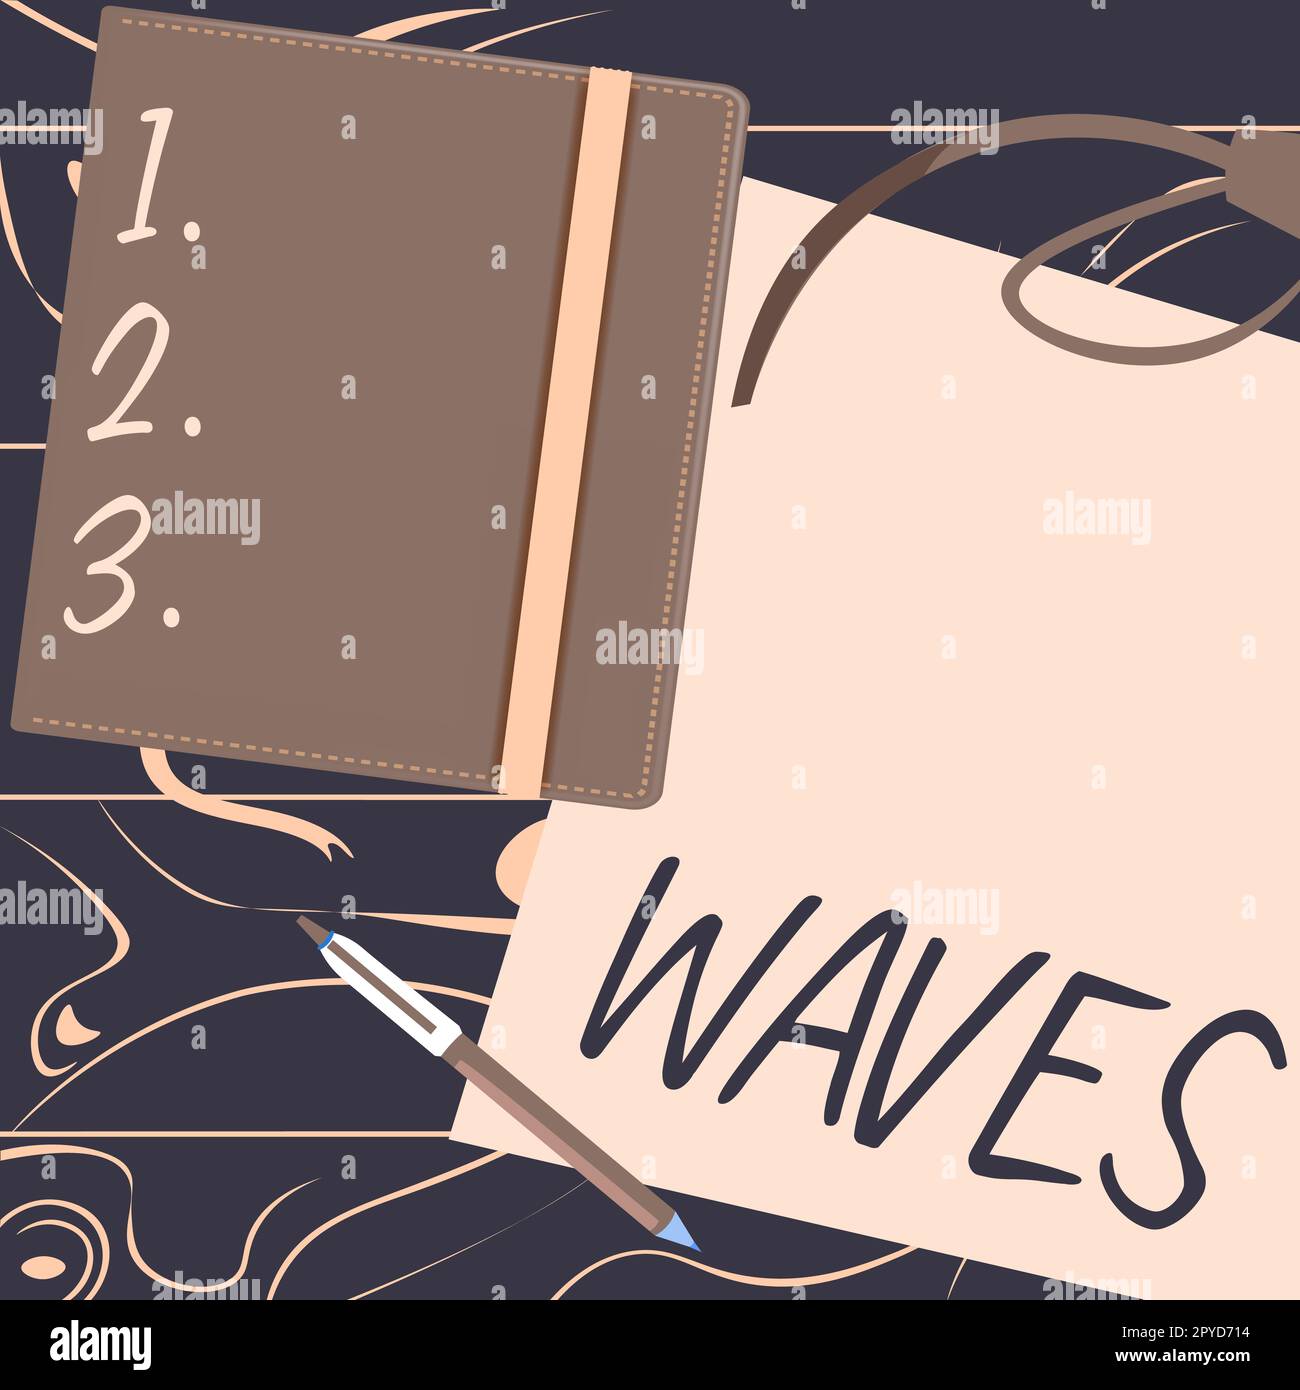 Text sign showing Waves. Business concept move ones hand to and fro in greeting or as signal Hair style Water Stock Photo